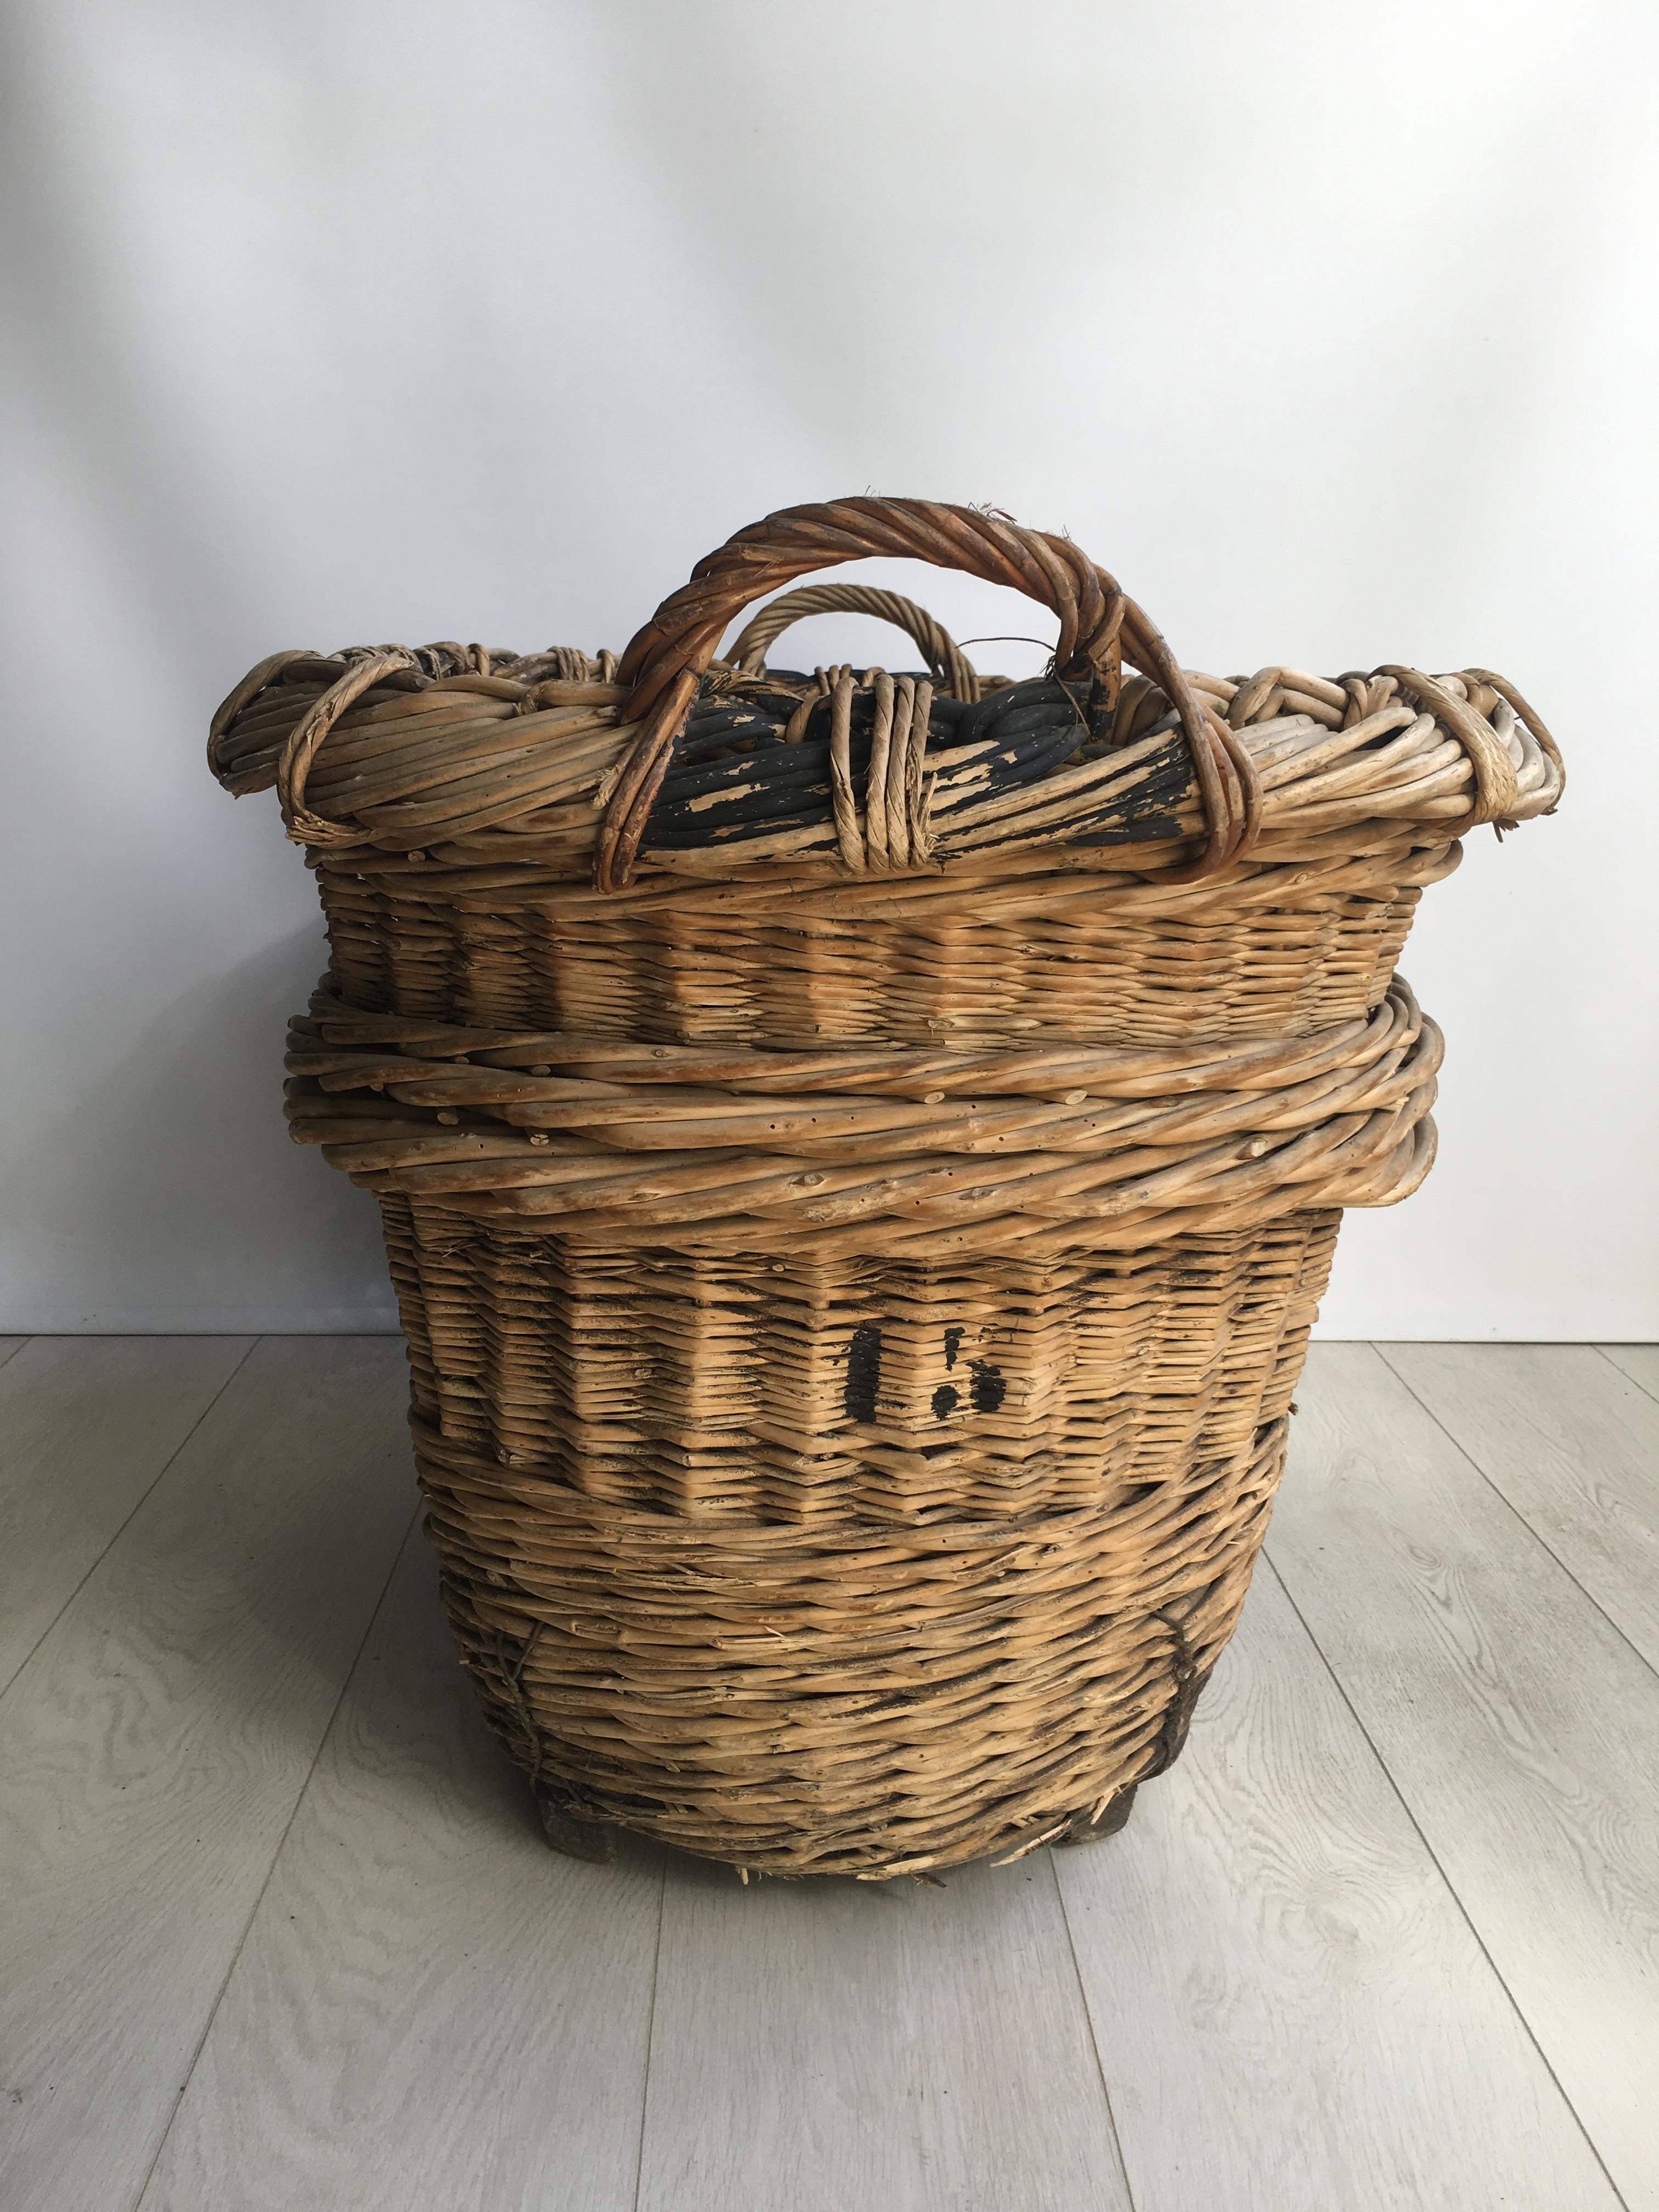 Beautiful heavy duty wicker baskets from the vineyards of Champagne region in France 

Lovely decorative baskets bound on wooden feet, very sturdy (some old woodworm holes, the entire basket has been treated)

Perfect fireside as a log/blanket